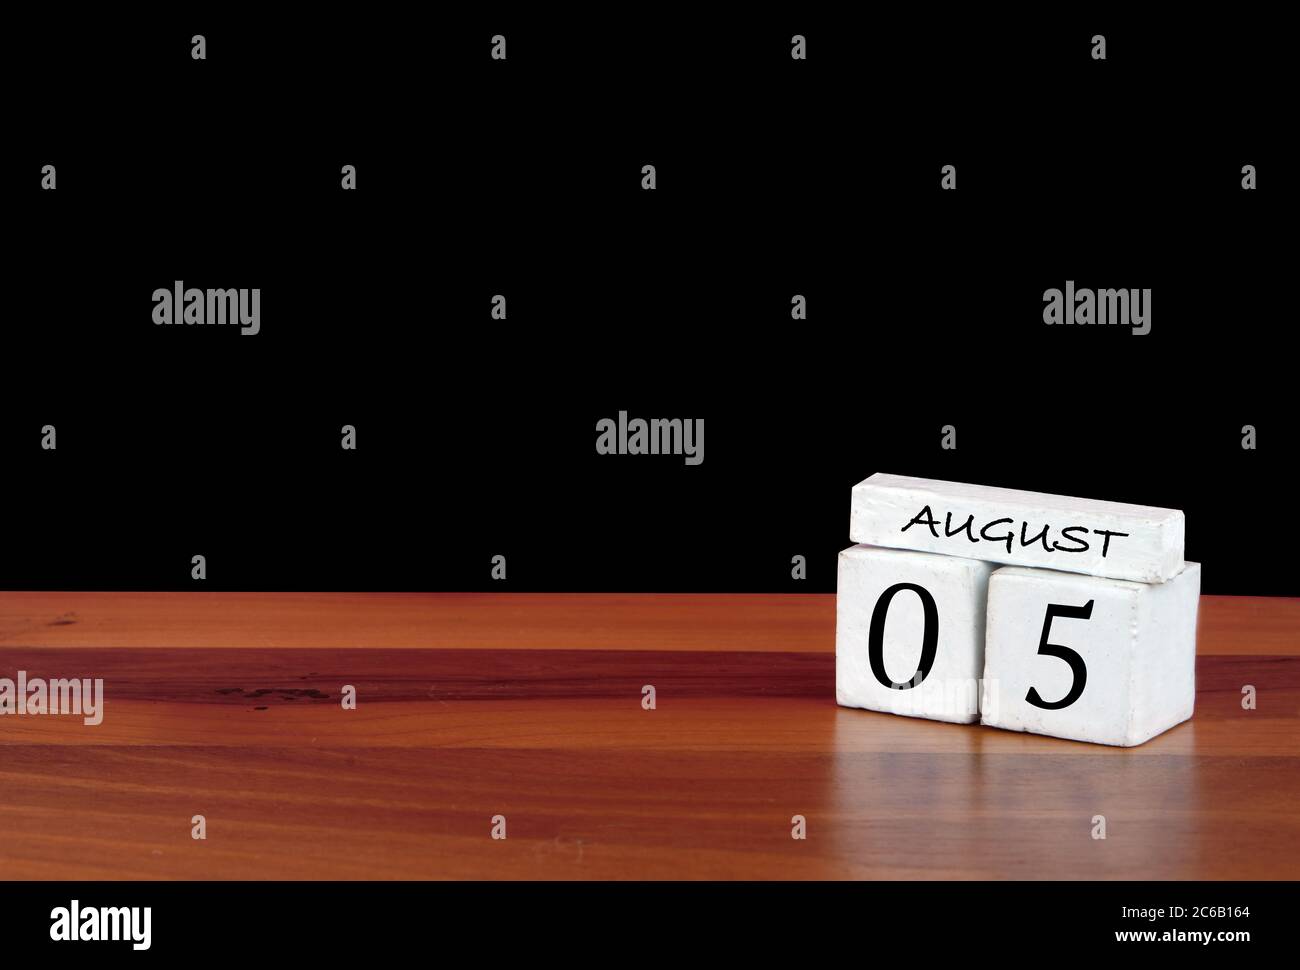 5 August calendar month. 5 days of the month. Reflected calendar on wooden floor with black background Stock Photo